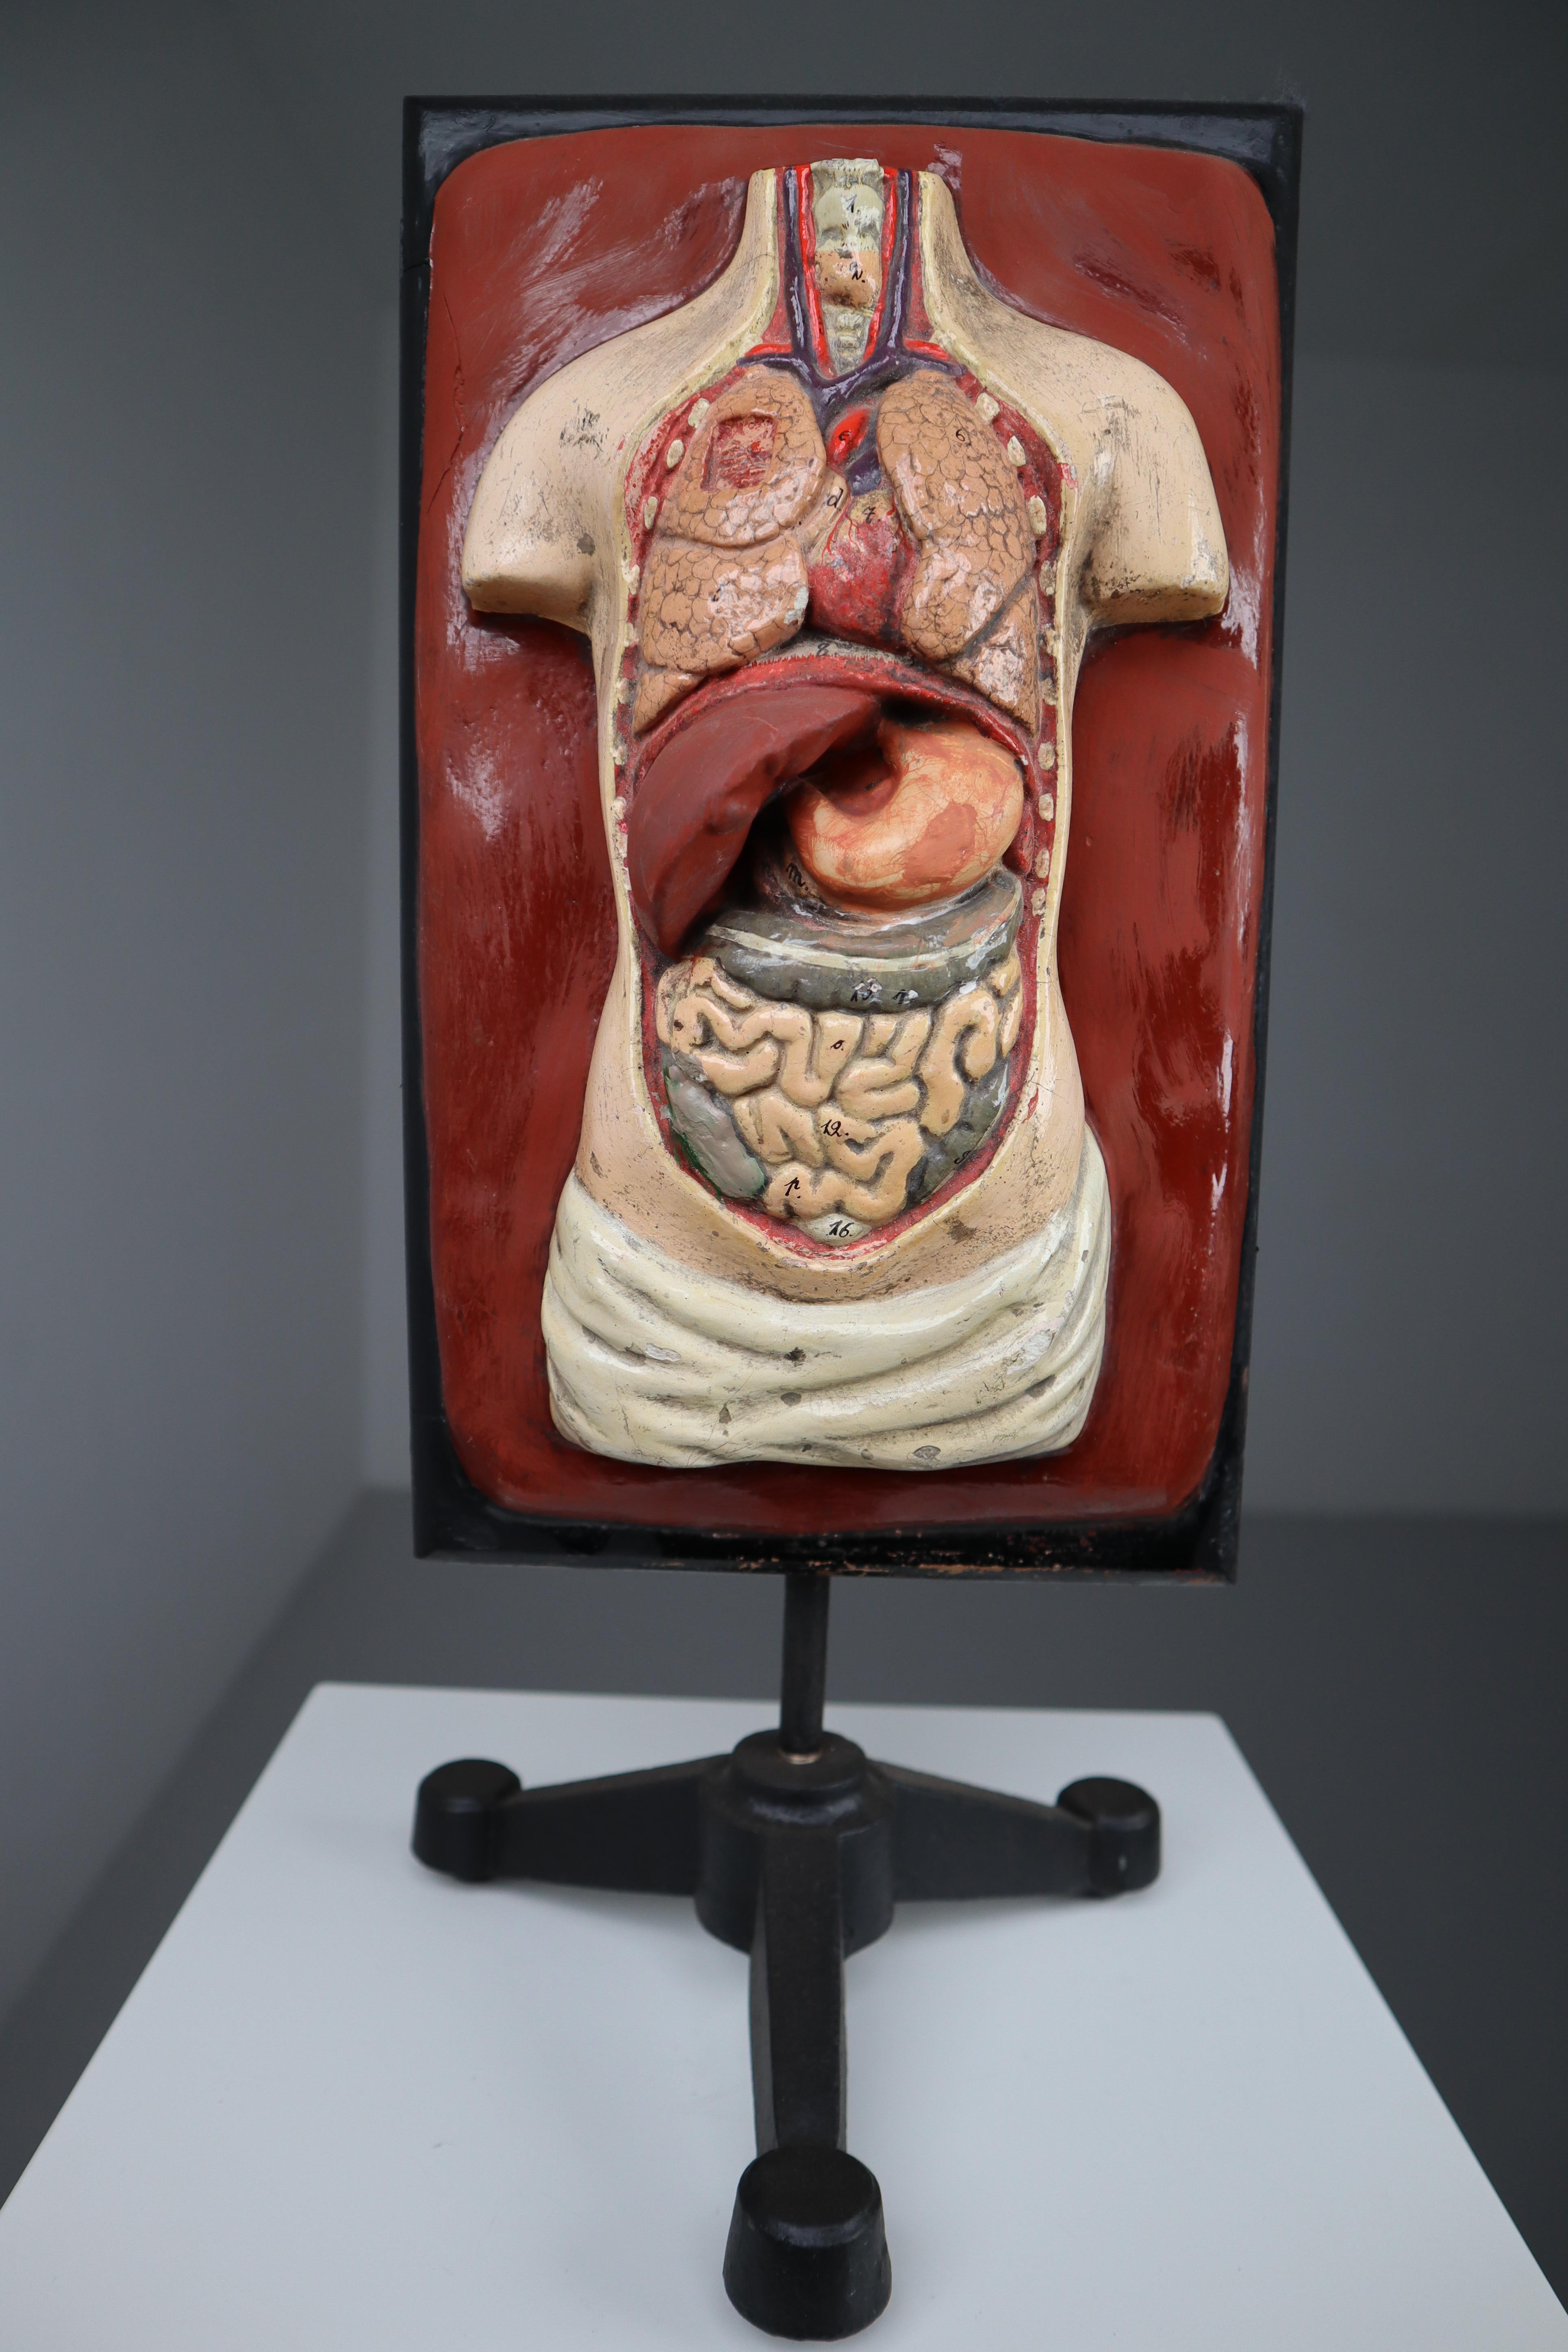 Human medical anatomical Torso model wood and plaster on metal base Czech Republic 1920s . Small damages and repairs. But overall great shape . Size W 8.5'' x H 19